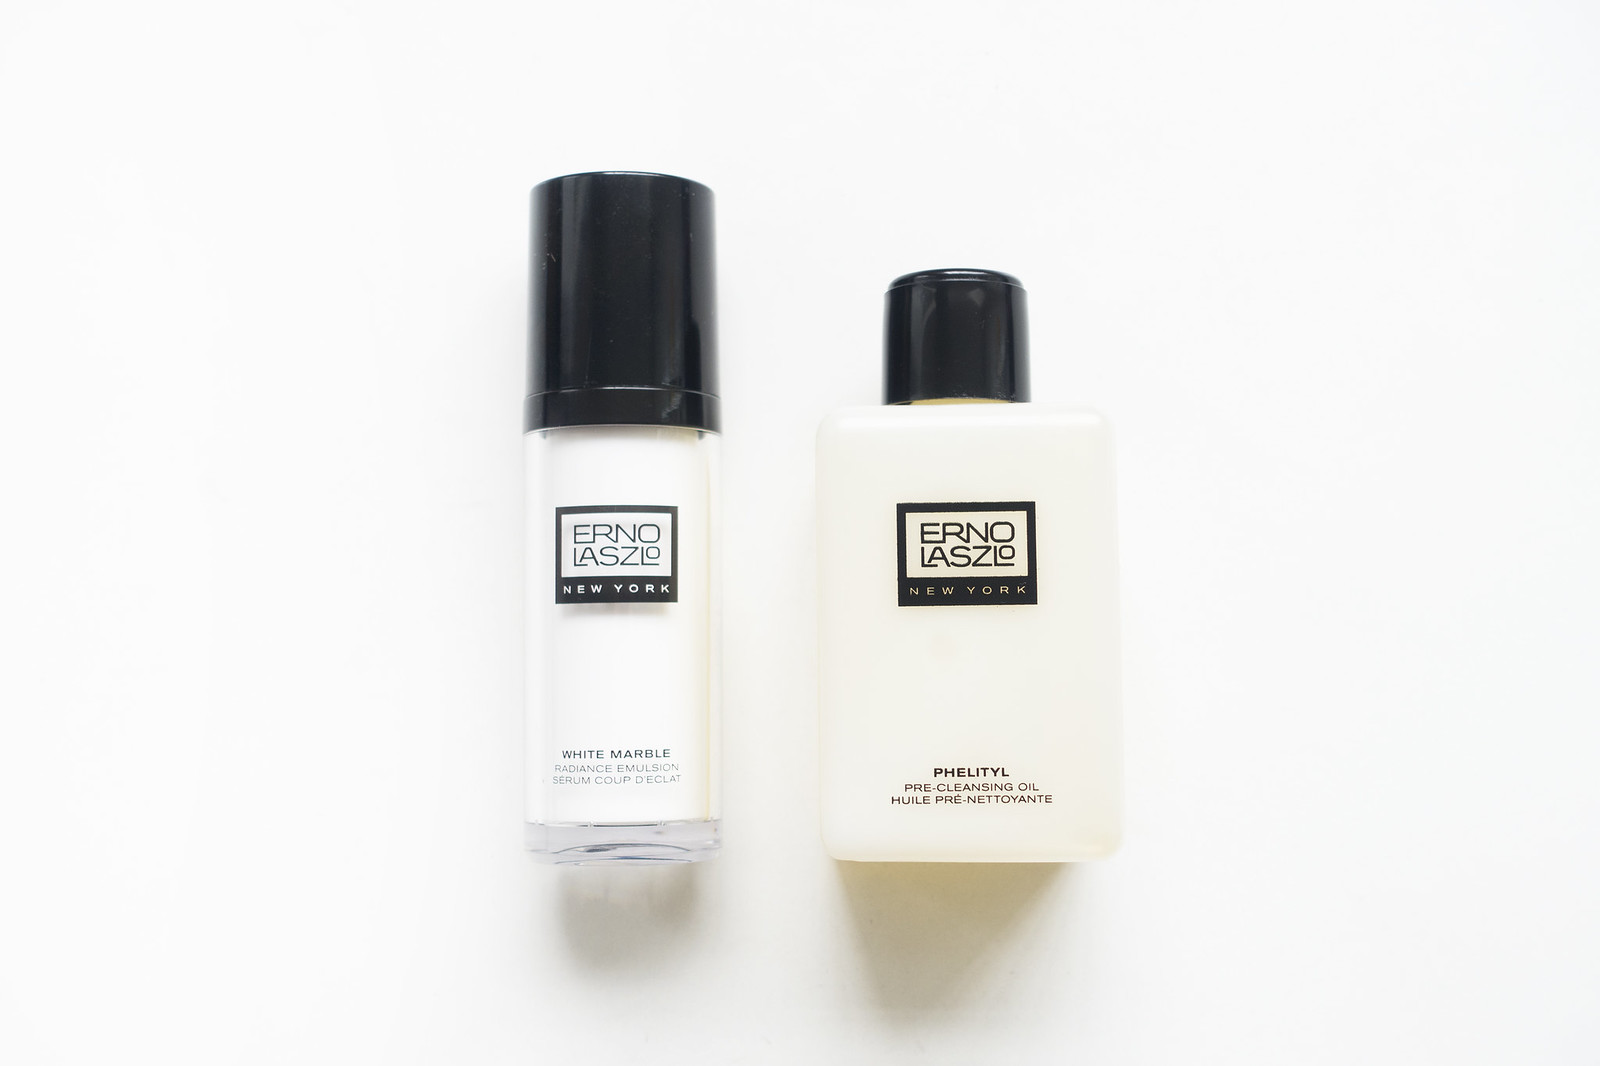 Products On Trial #2 | Final Reviews: Erno Laslo